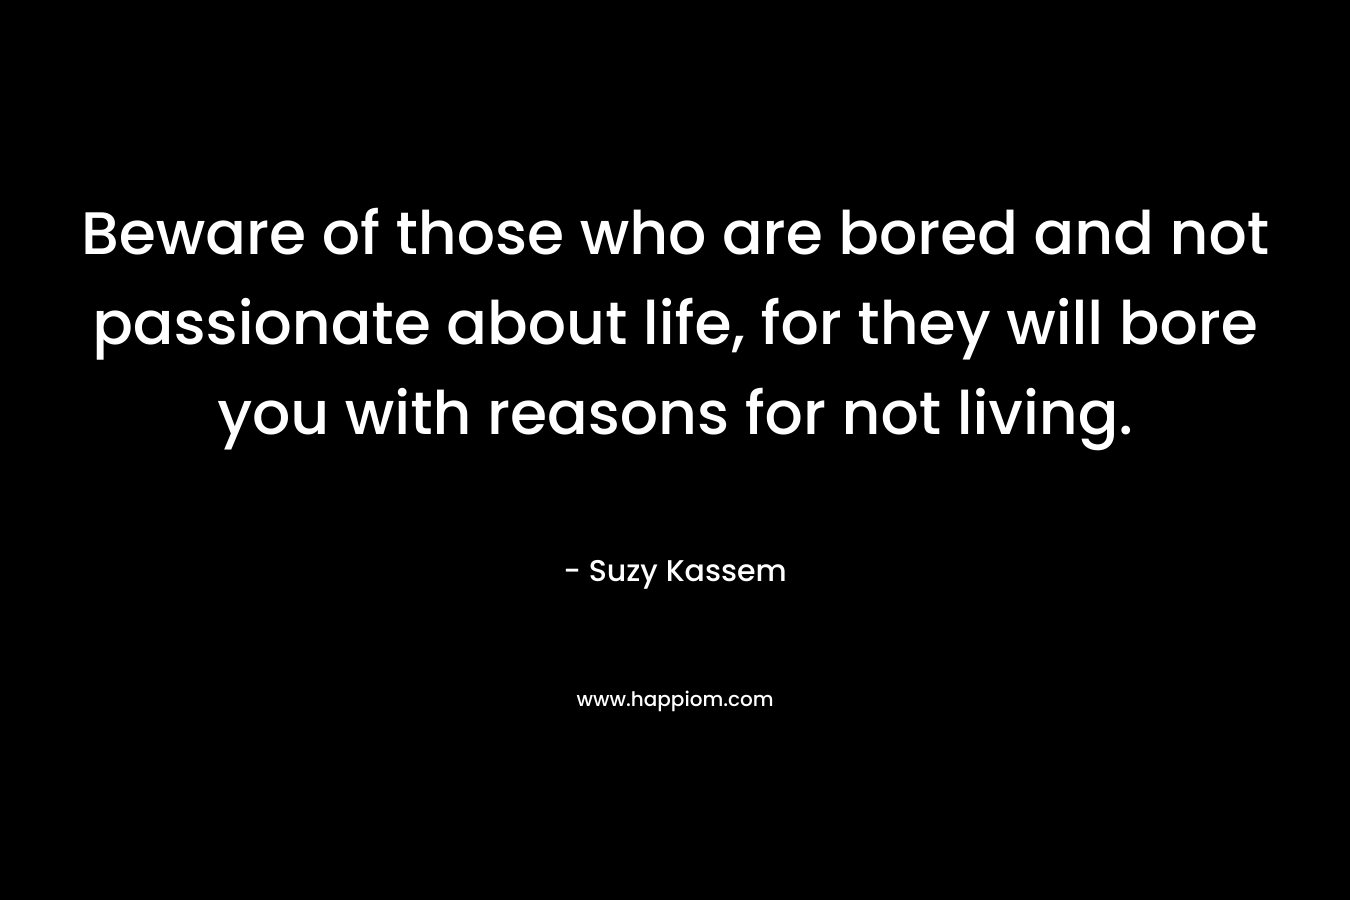 Beware of those who are bored and not passionate about life, for they will bore you with reasons for not living.